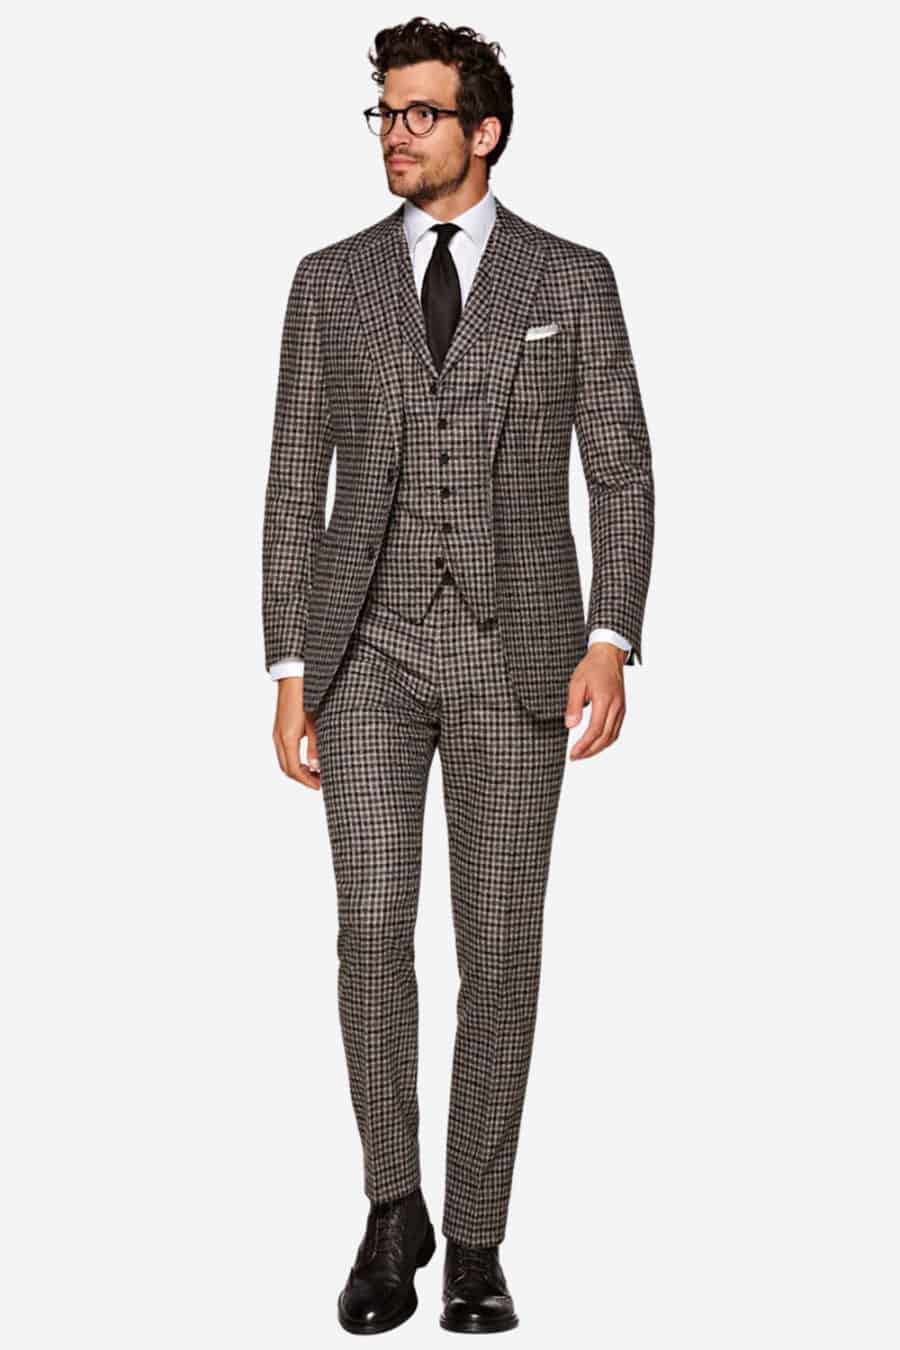 Men's tweed three-piece suit, white shirt and brown leather Derby boots outfit